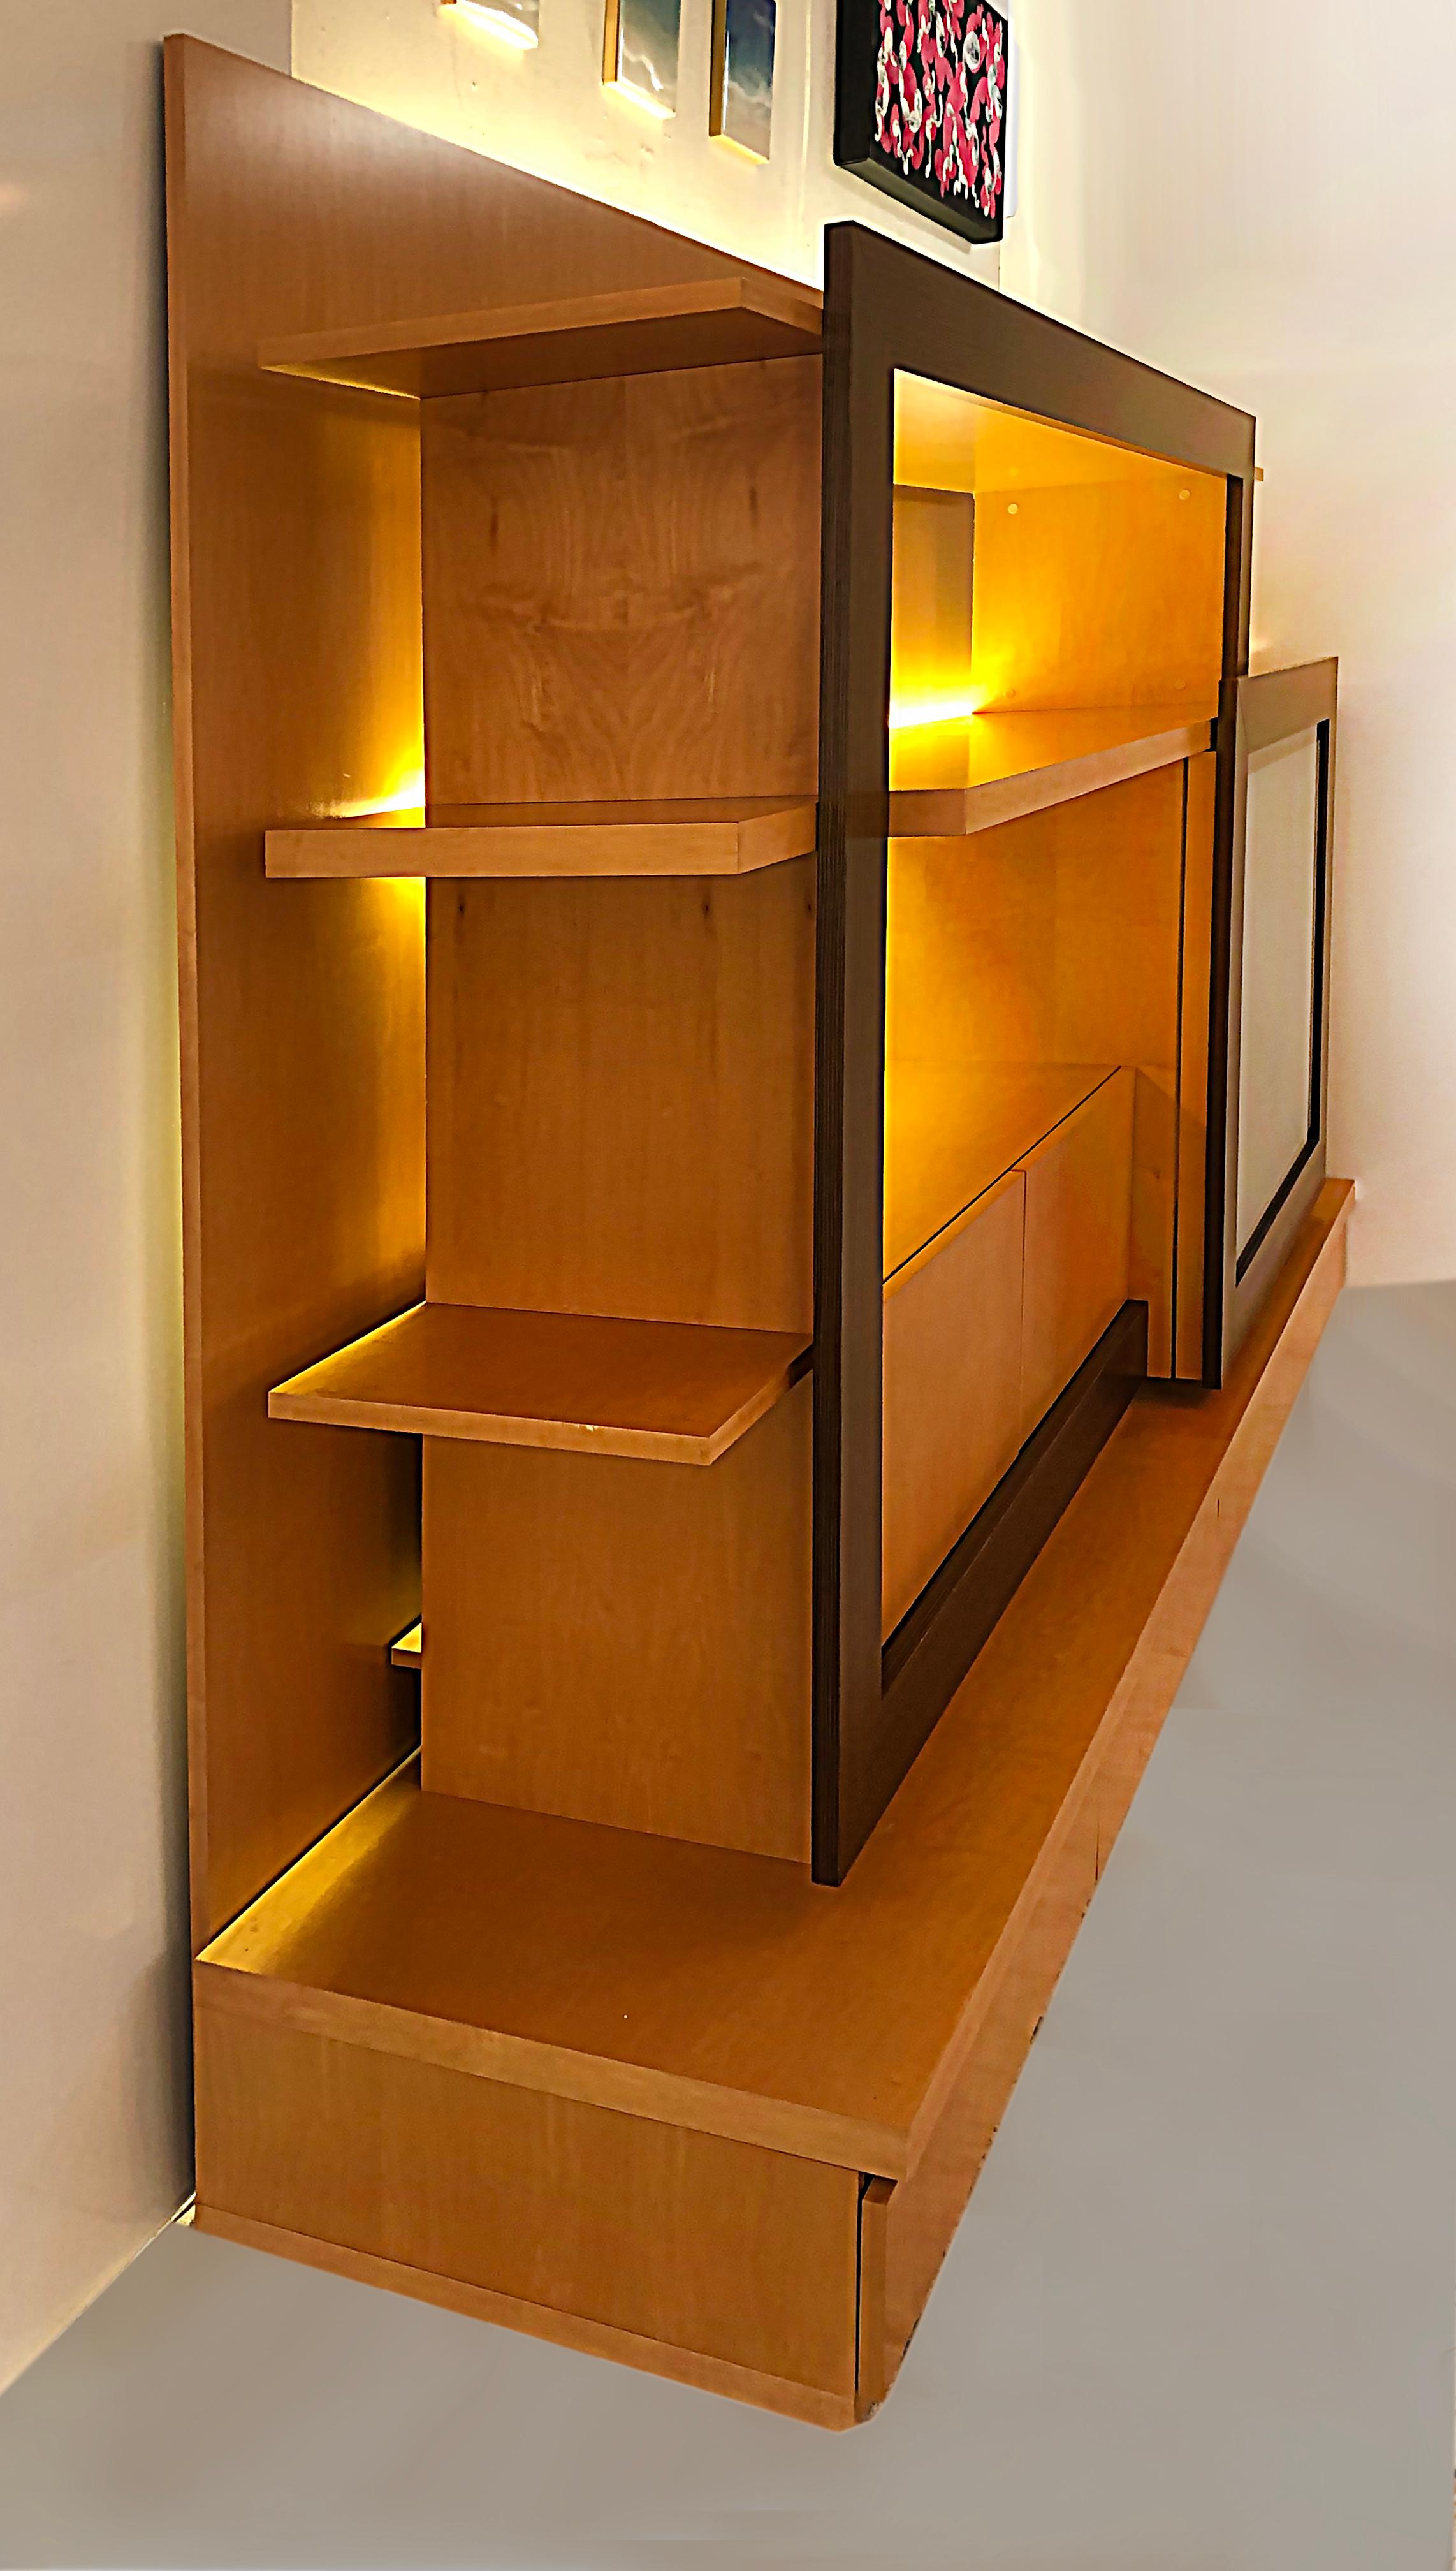 Roche Bobois Maple Carnaval Wall Unit Media Cabinet, France 2012 with Lighting In Good Condition For Sale In Miami, FL